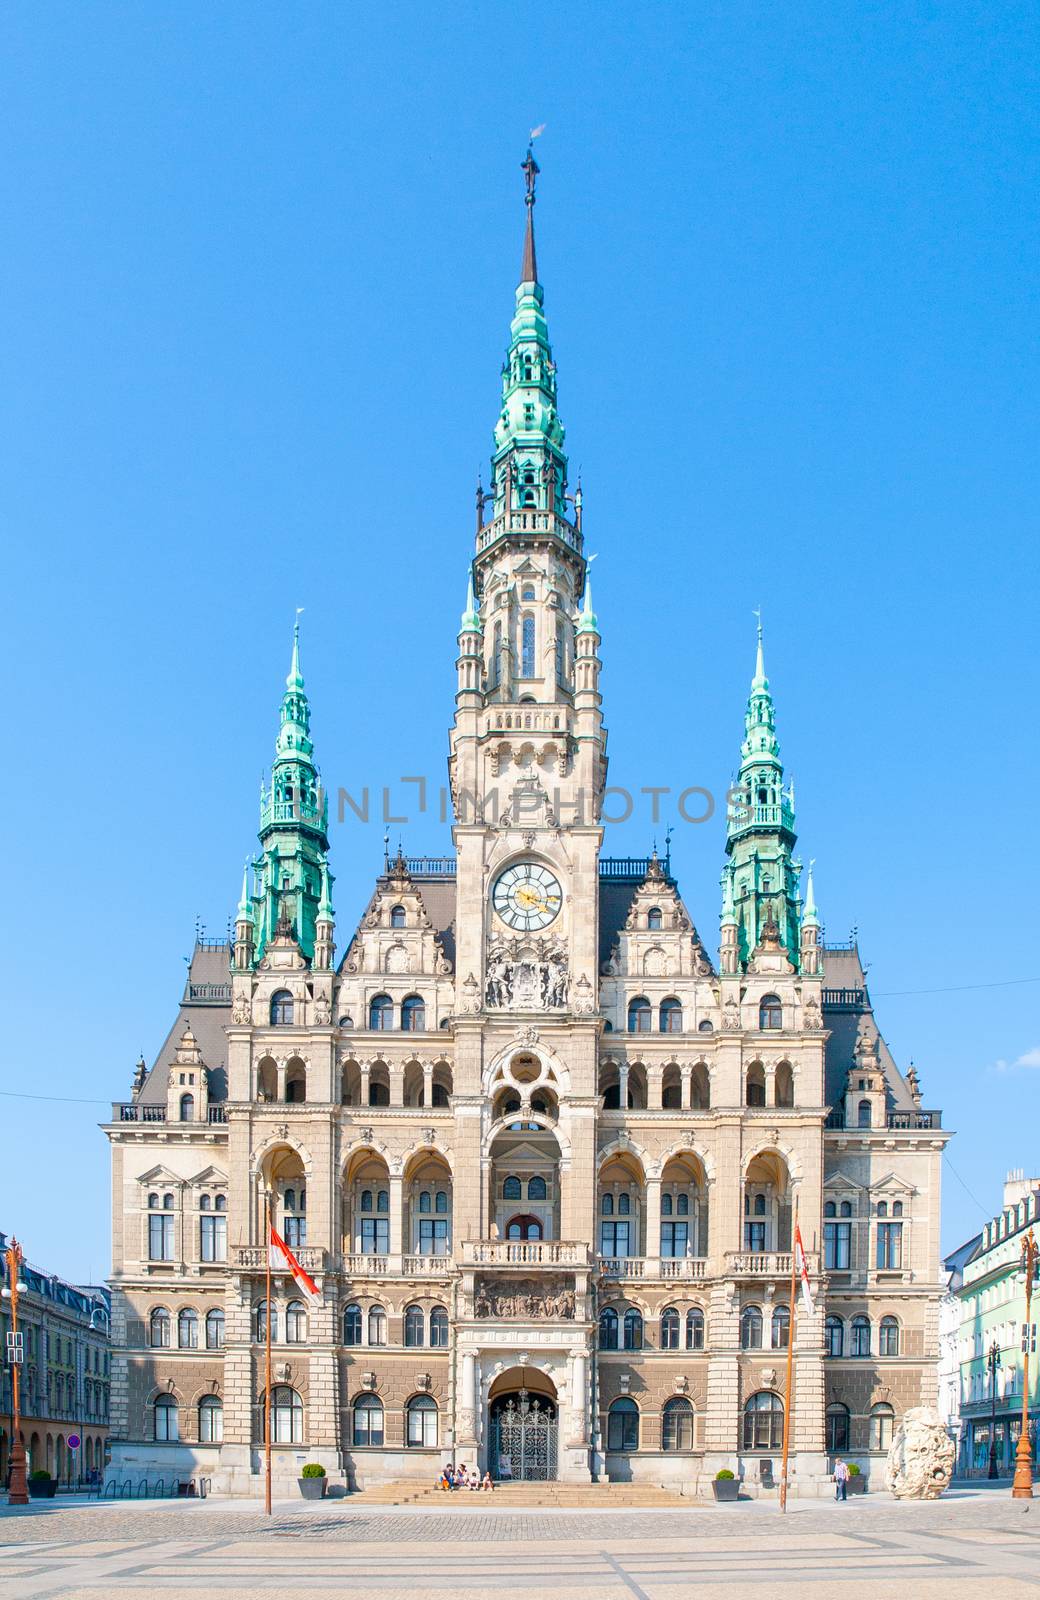 Town Hall on Edvard Benes Square in Liberec, Czech Republic by pyty